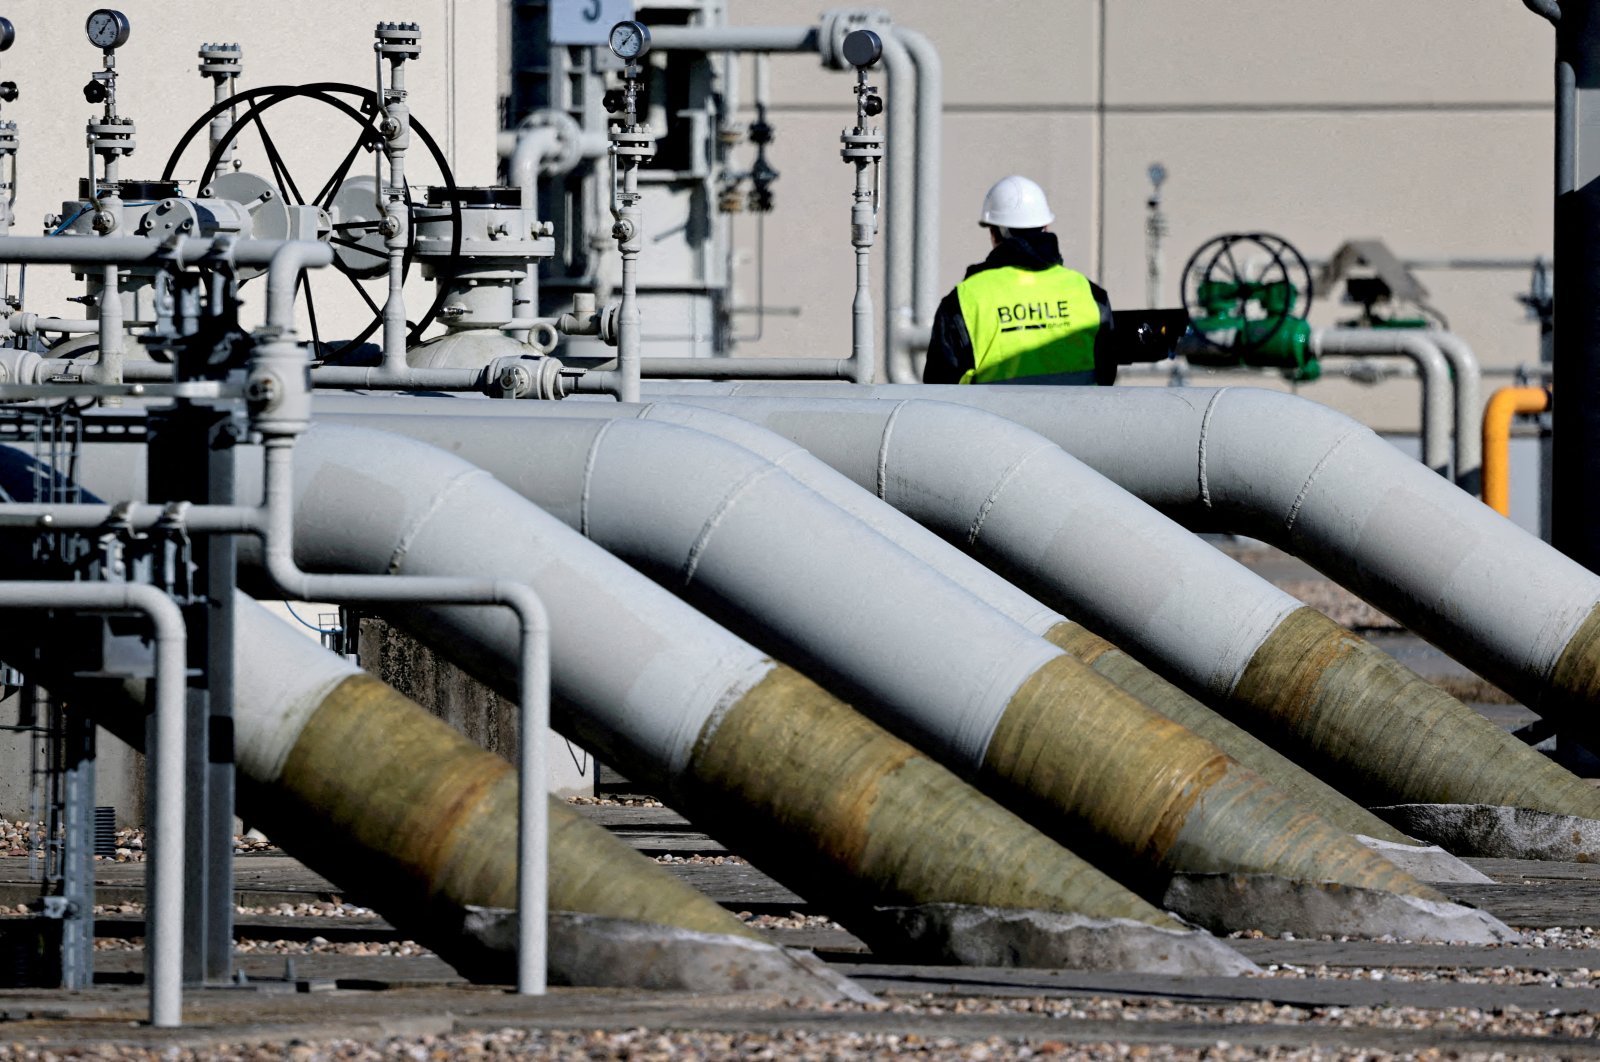 Pipes at the landfall facilities of the &quot;Nord Stream 1&quot; gas pipeline are pictured in Lubmin, Germany, March 8, 2022. (Reuters Photo)